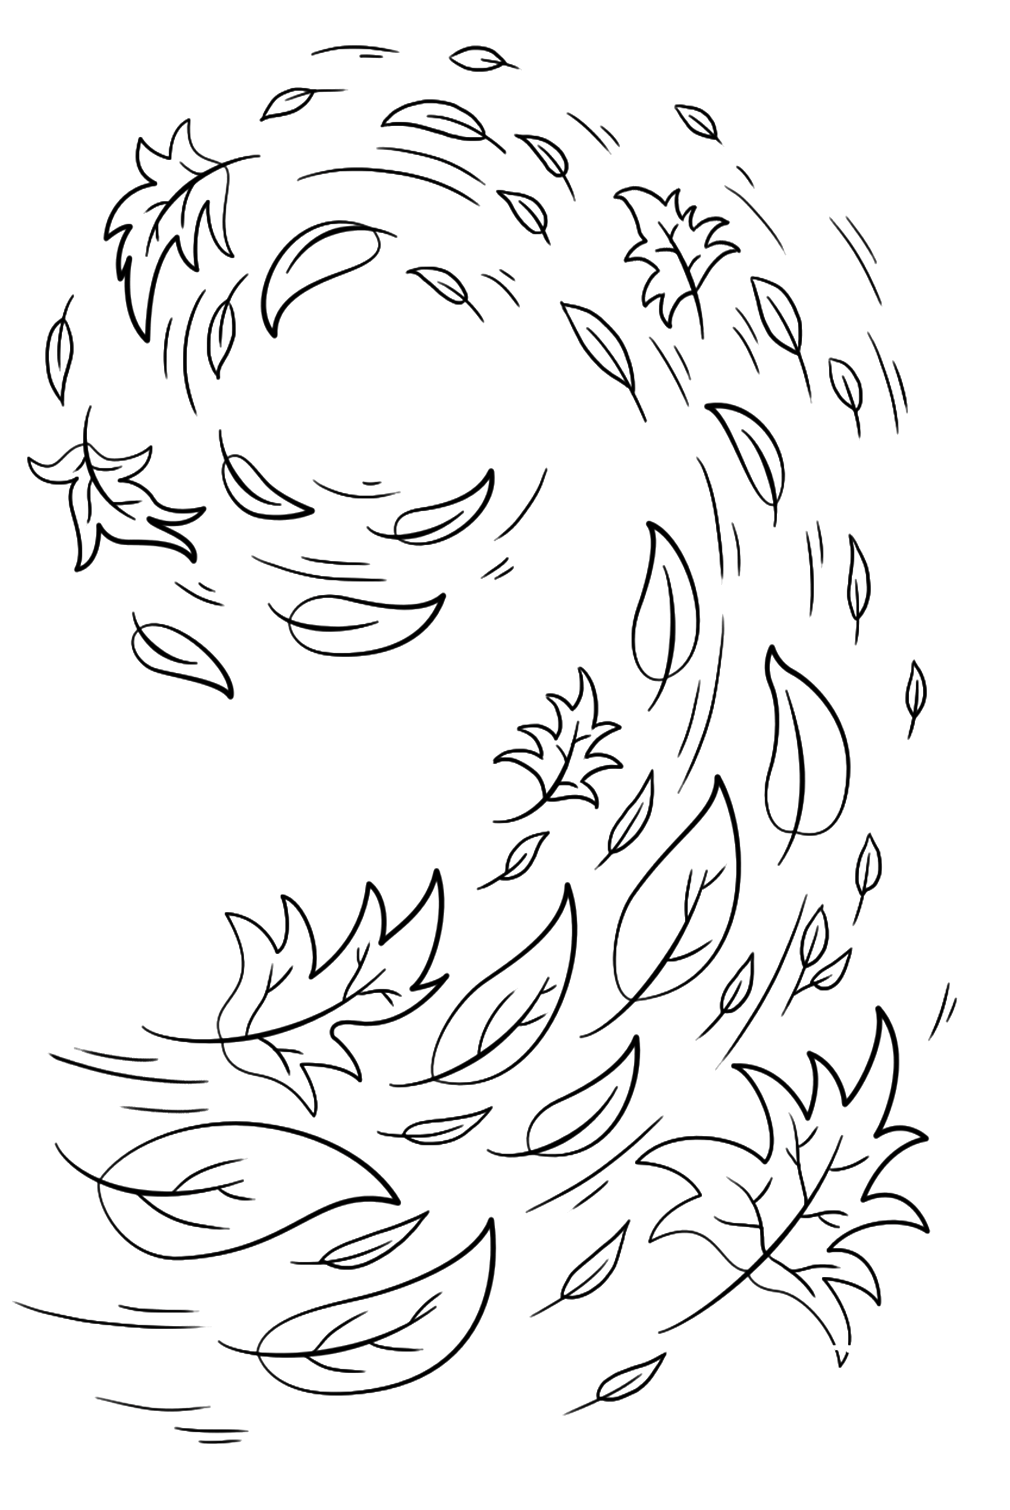 Swirling Autumn Leaves Coloring Page